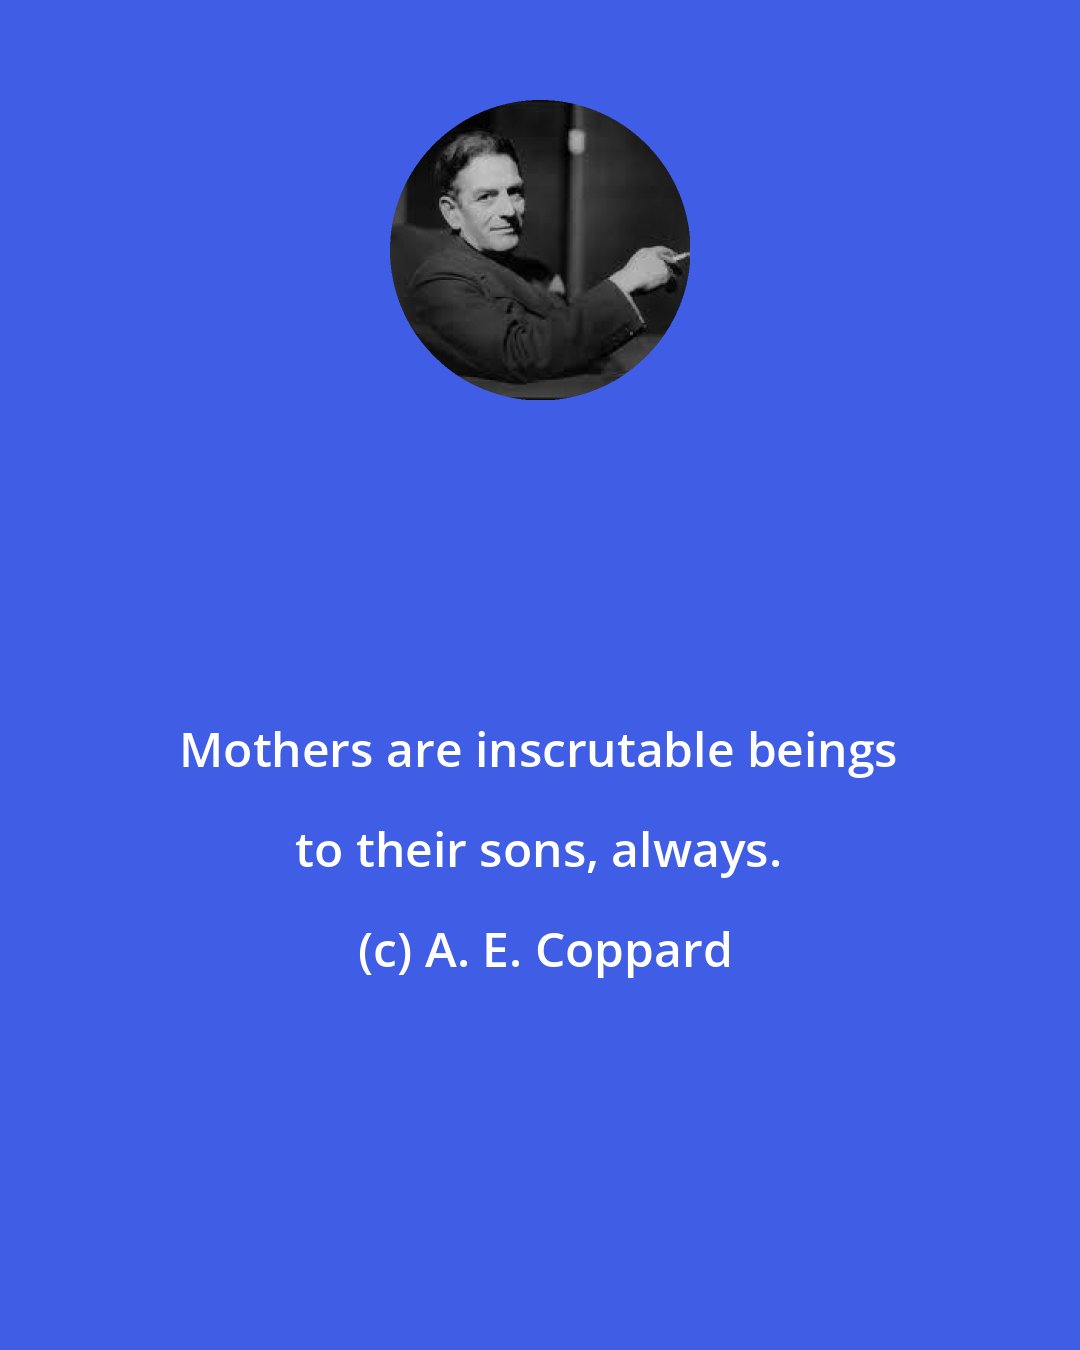 A. E. Coppard: Mothers are inscrutable beings to their sons, always.